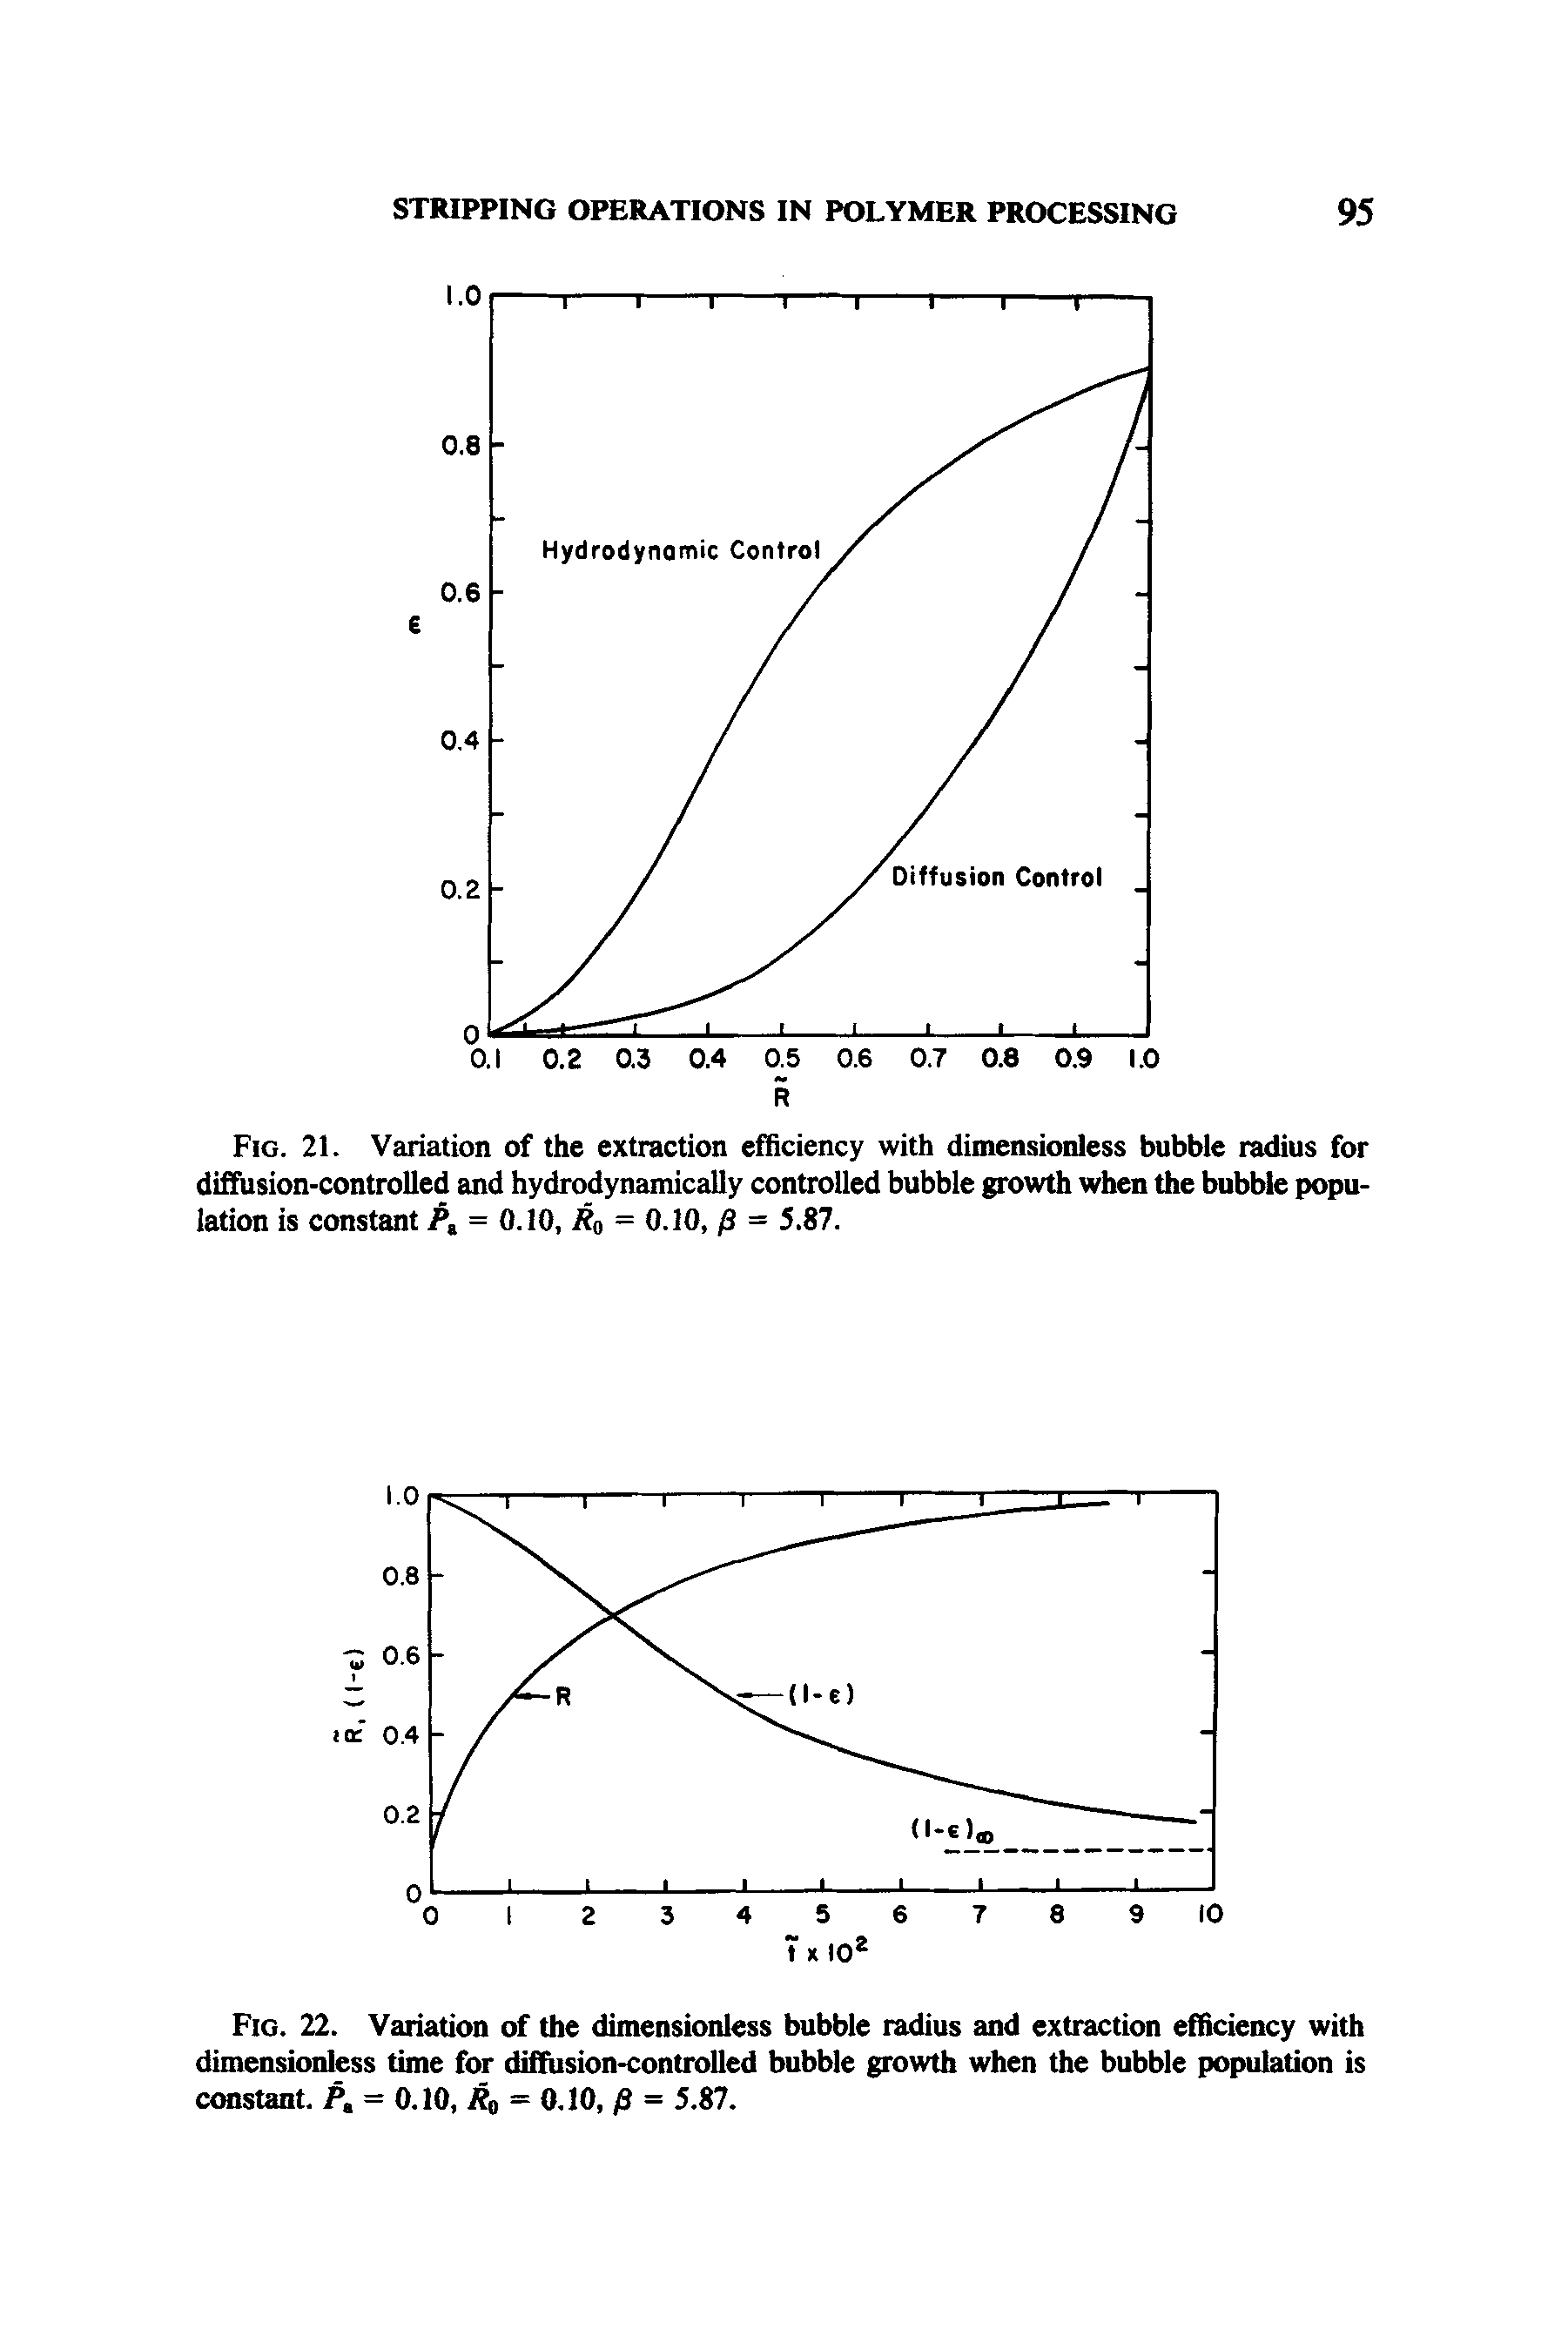 Fig. 21. Variation of the extraction efficiency with dimensionless bubble radius for diffusion-controlled and hydrodynamically controlled bubble growth when the bubble population is constant = 0.10, Xo = 0.10, = 5.87.